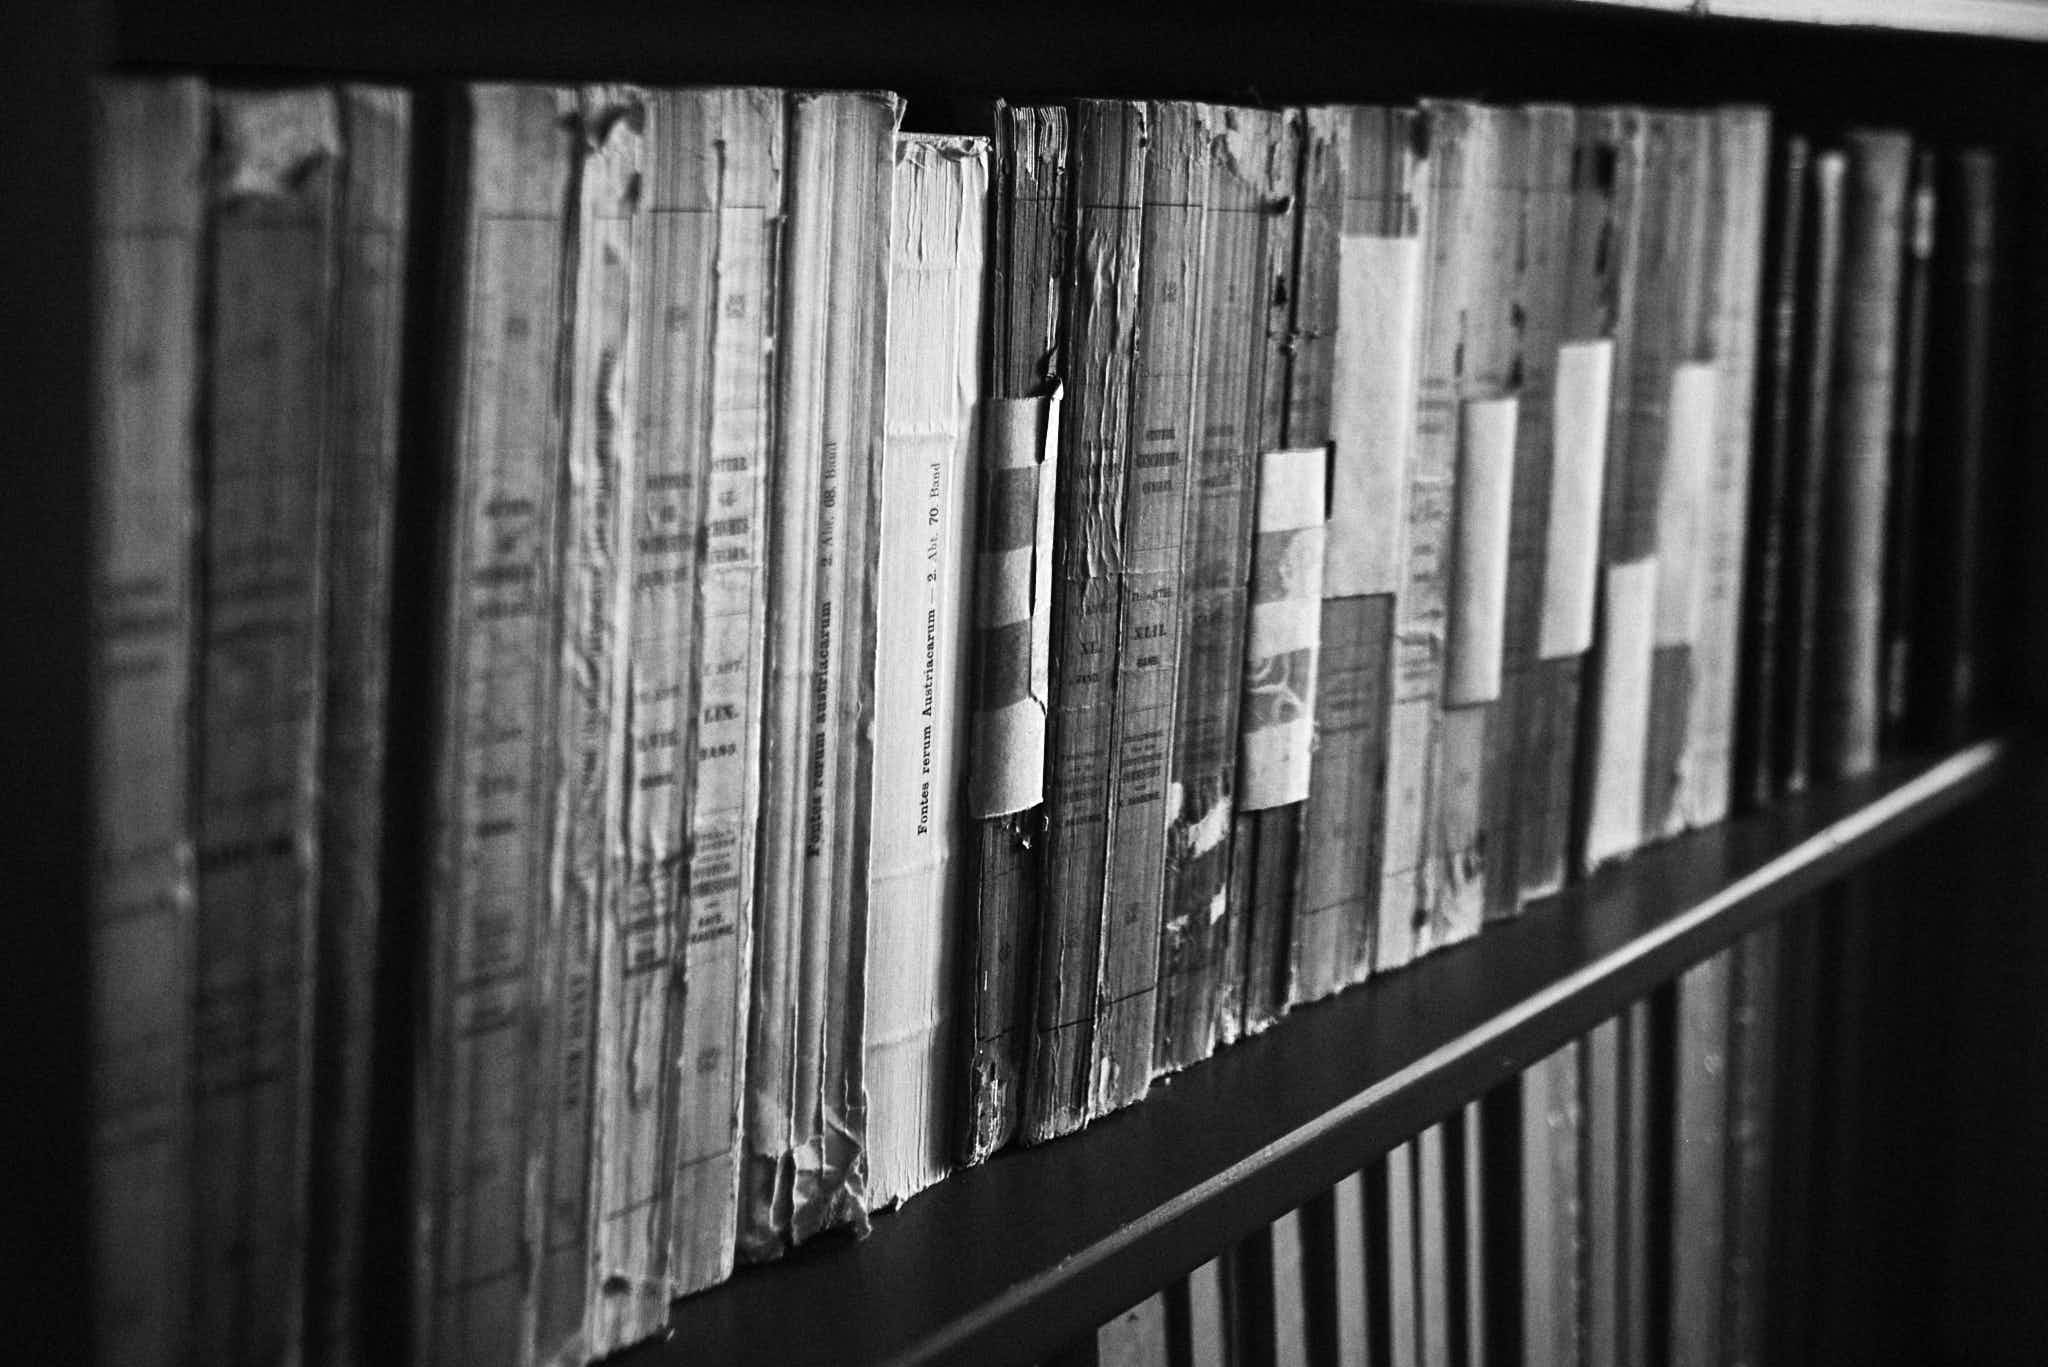 Still life #240331.3. A black and white photograph of old books on a shelf.